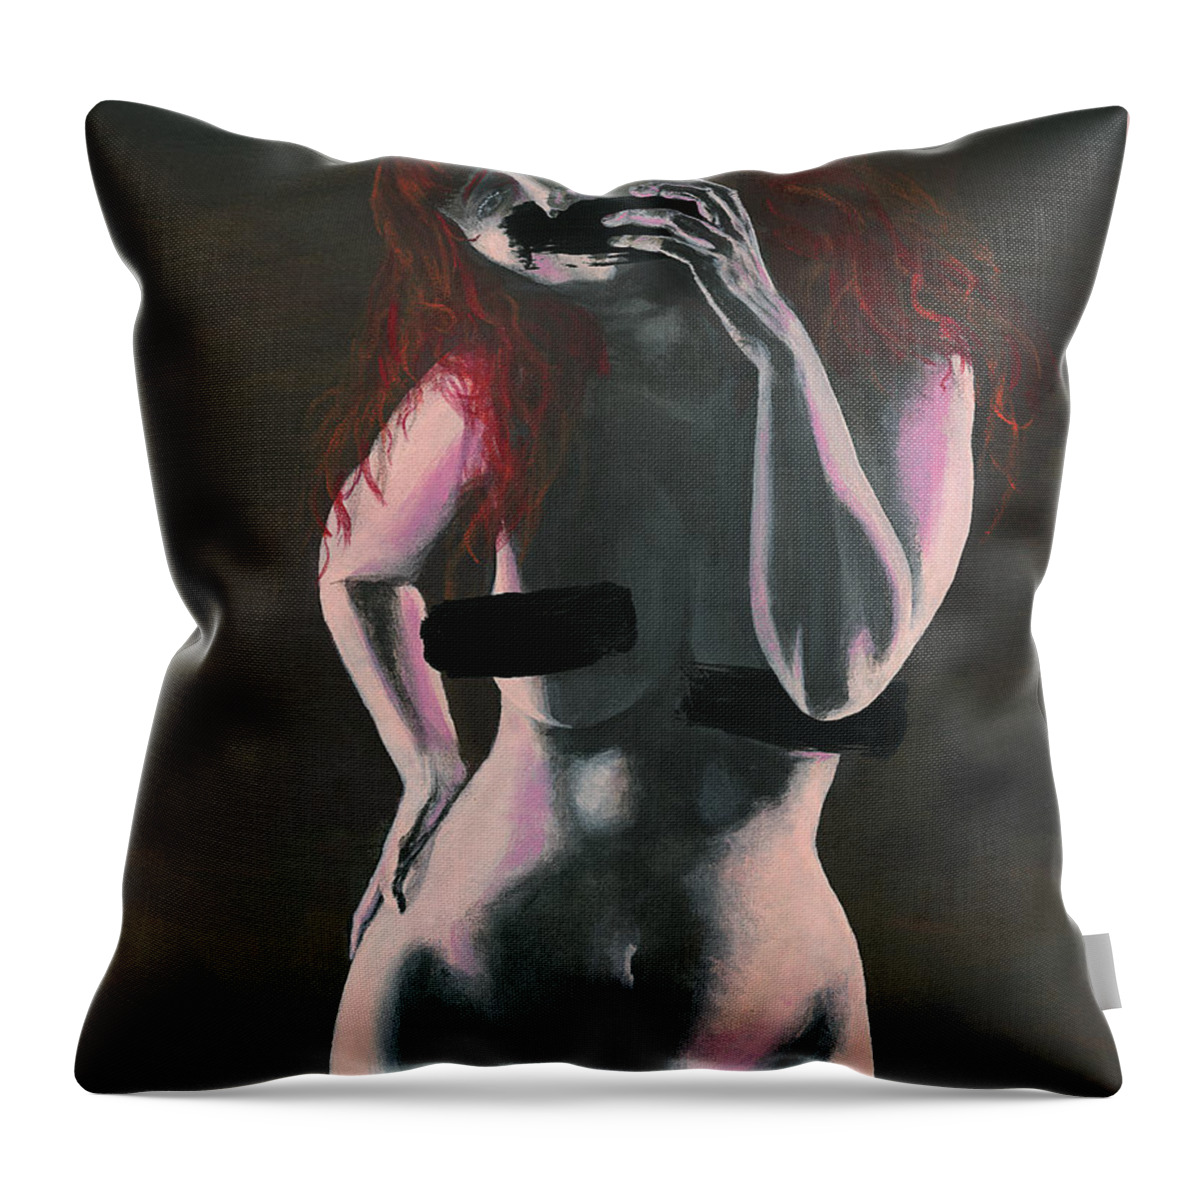 Acrylic Throw Pillow featuring the painting Censored by Matthew Mezo